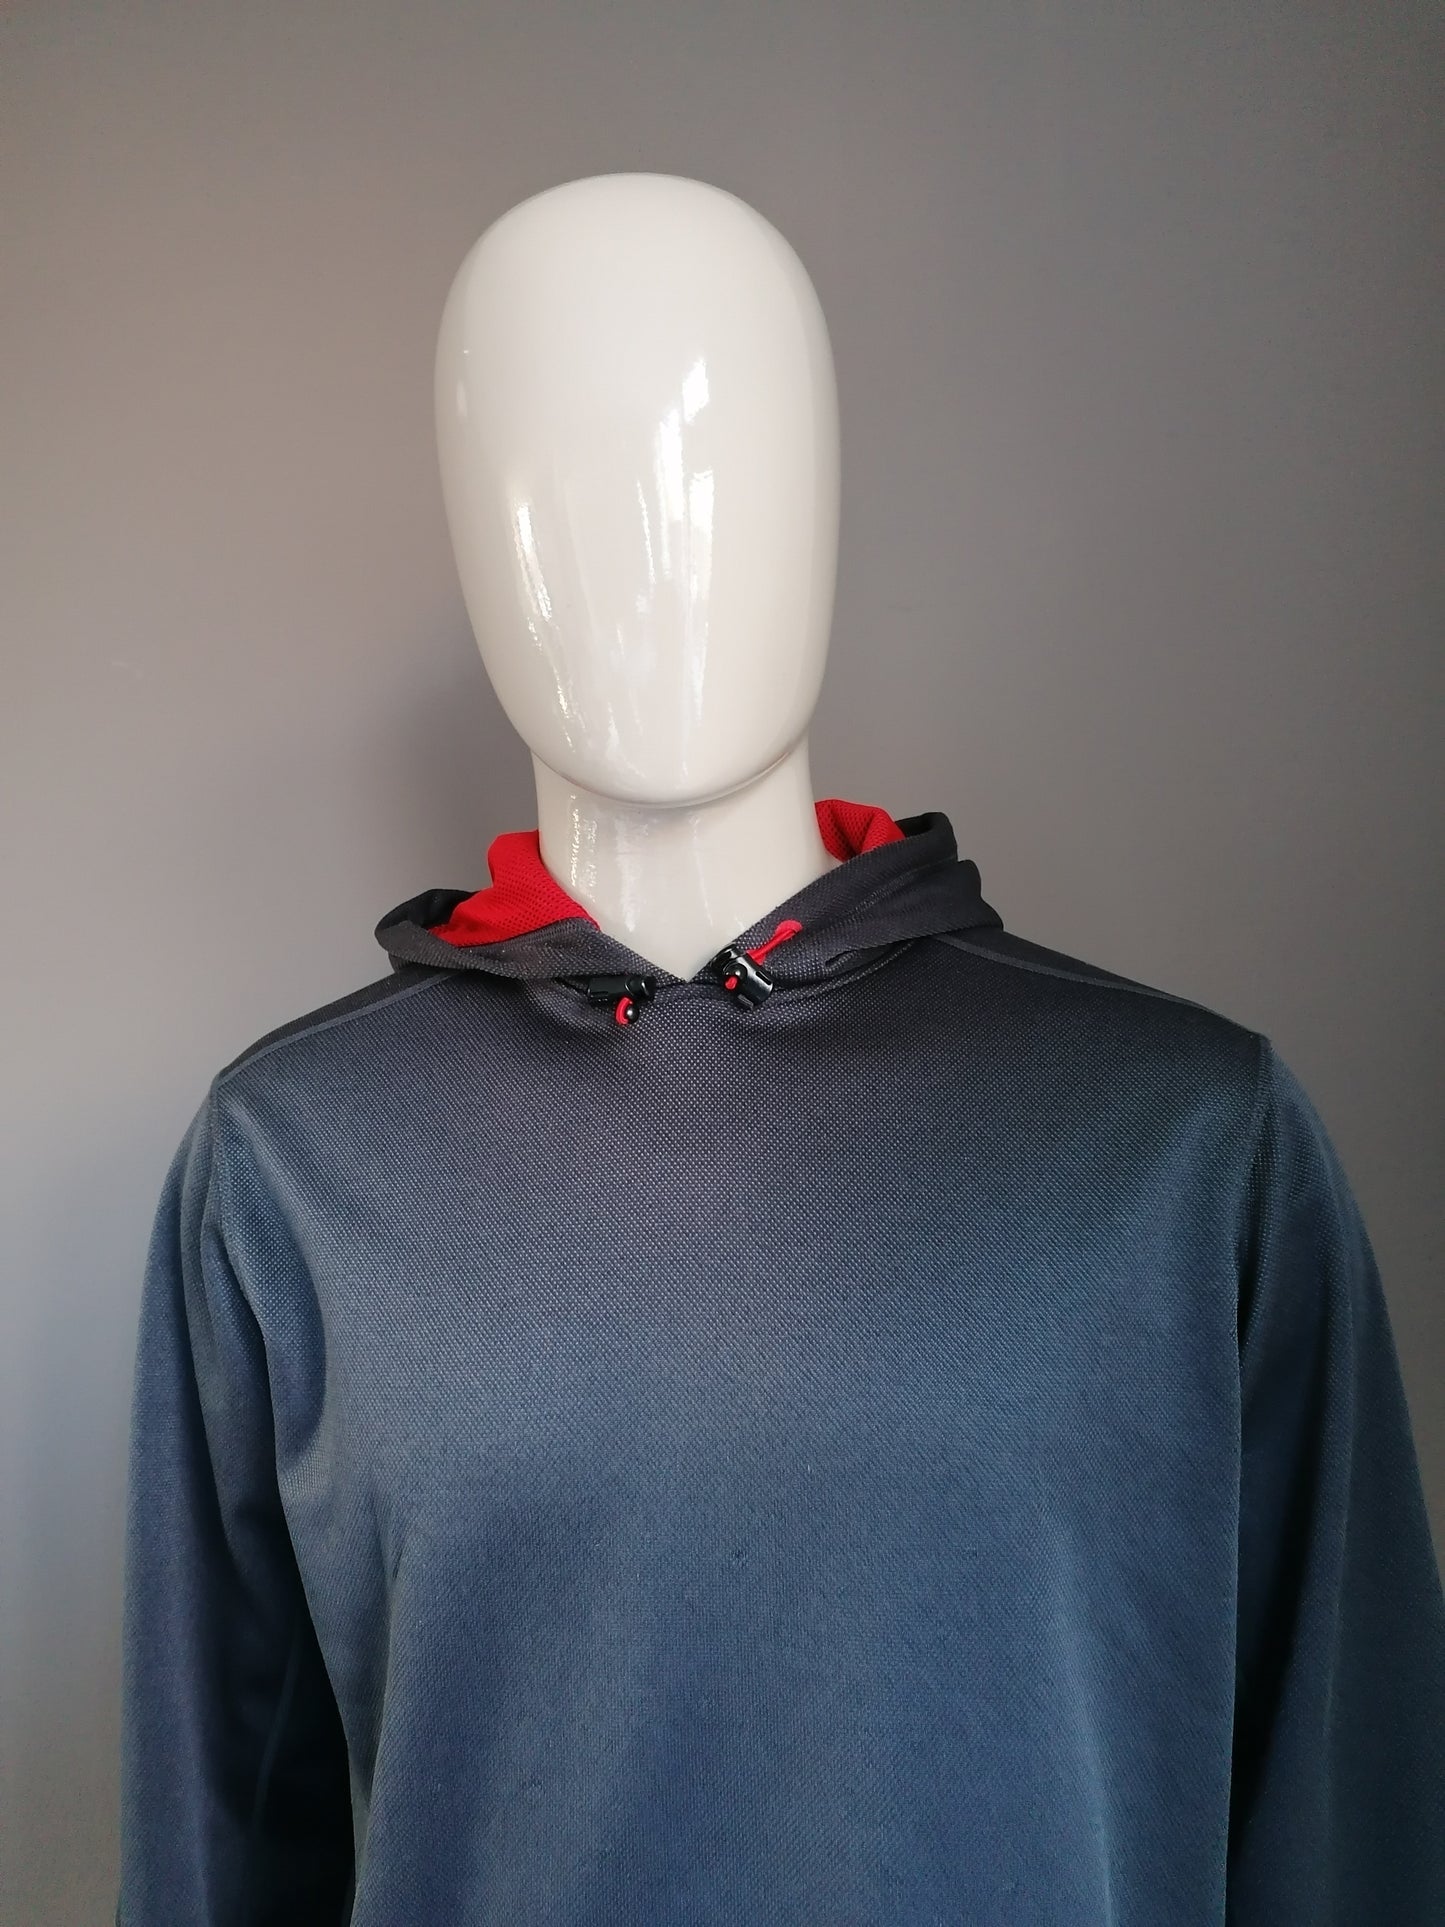 Fila sport hoodie. Gray colored. Size XL.